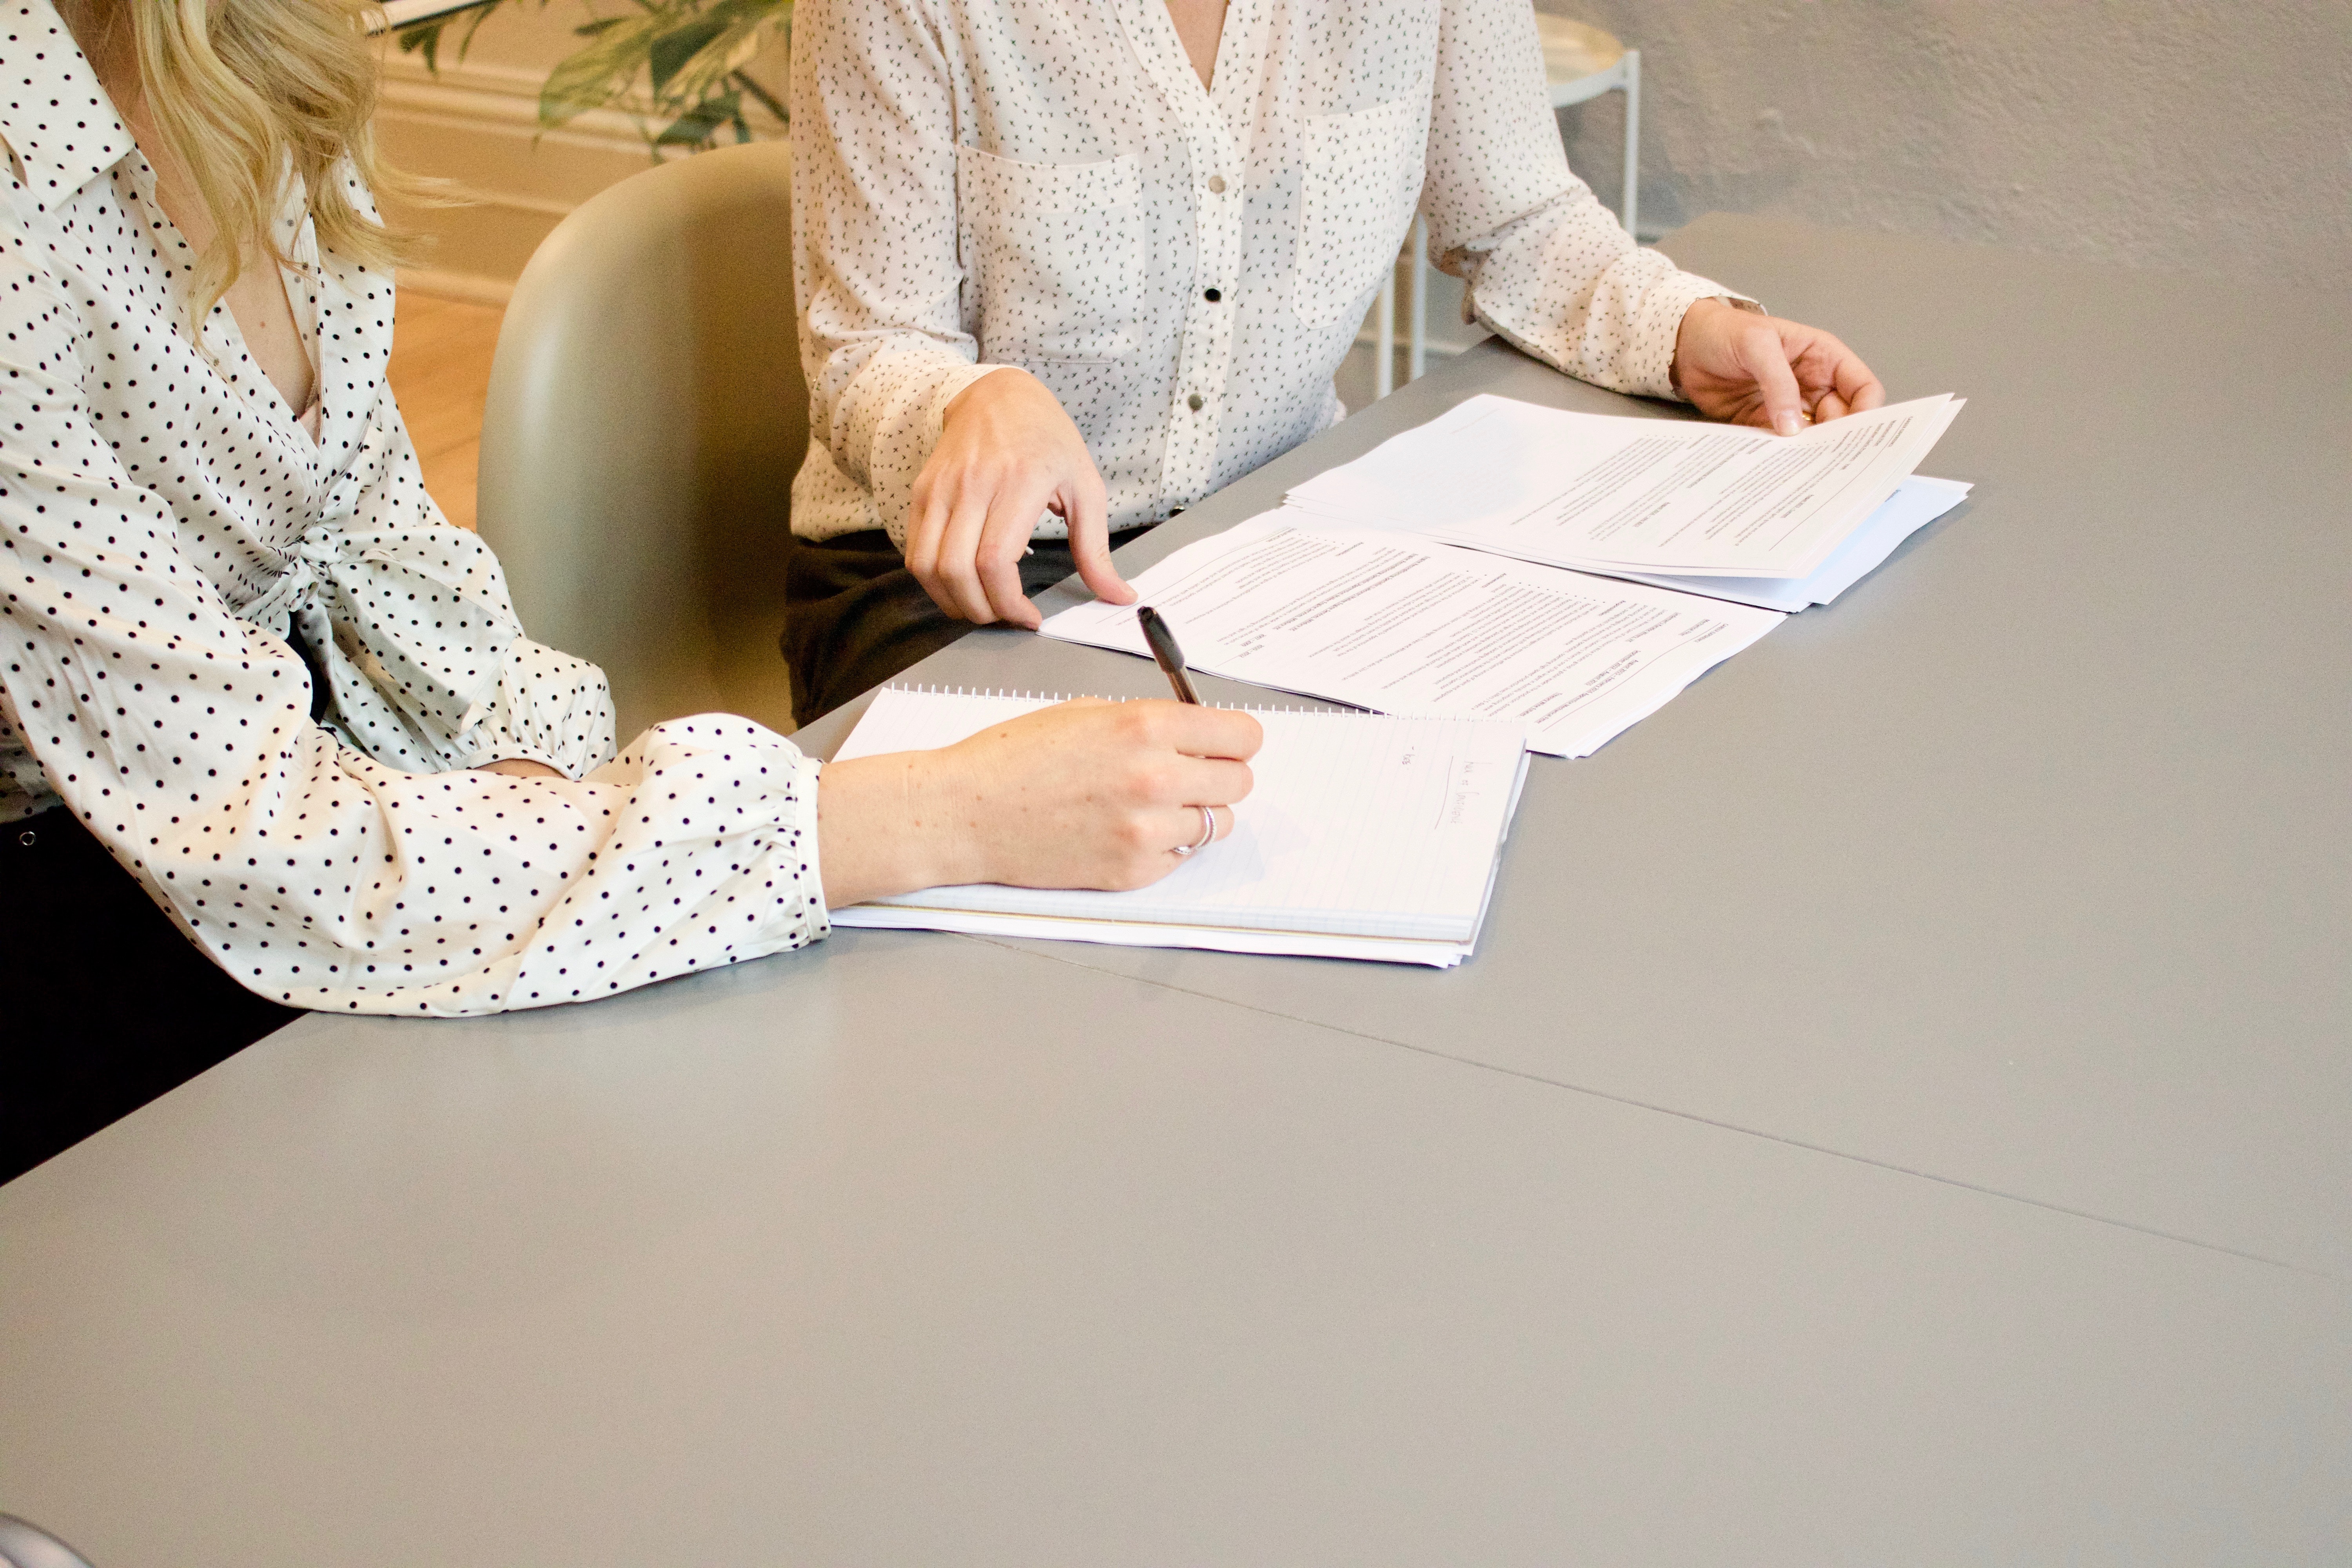 Two women writing or signing a document